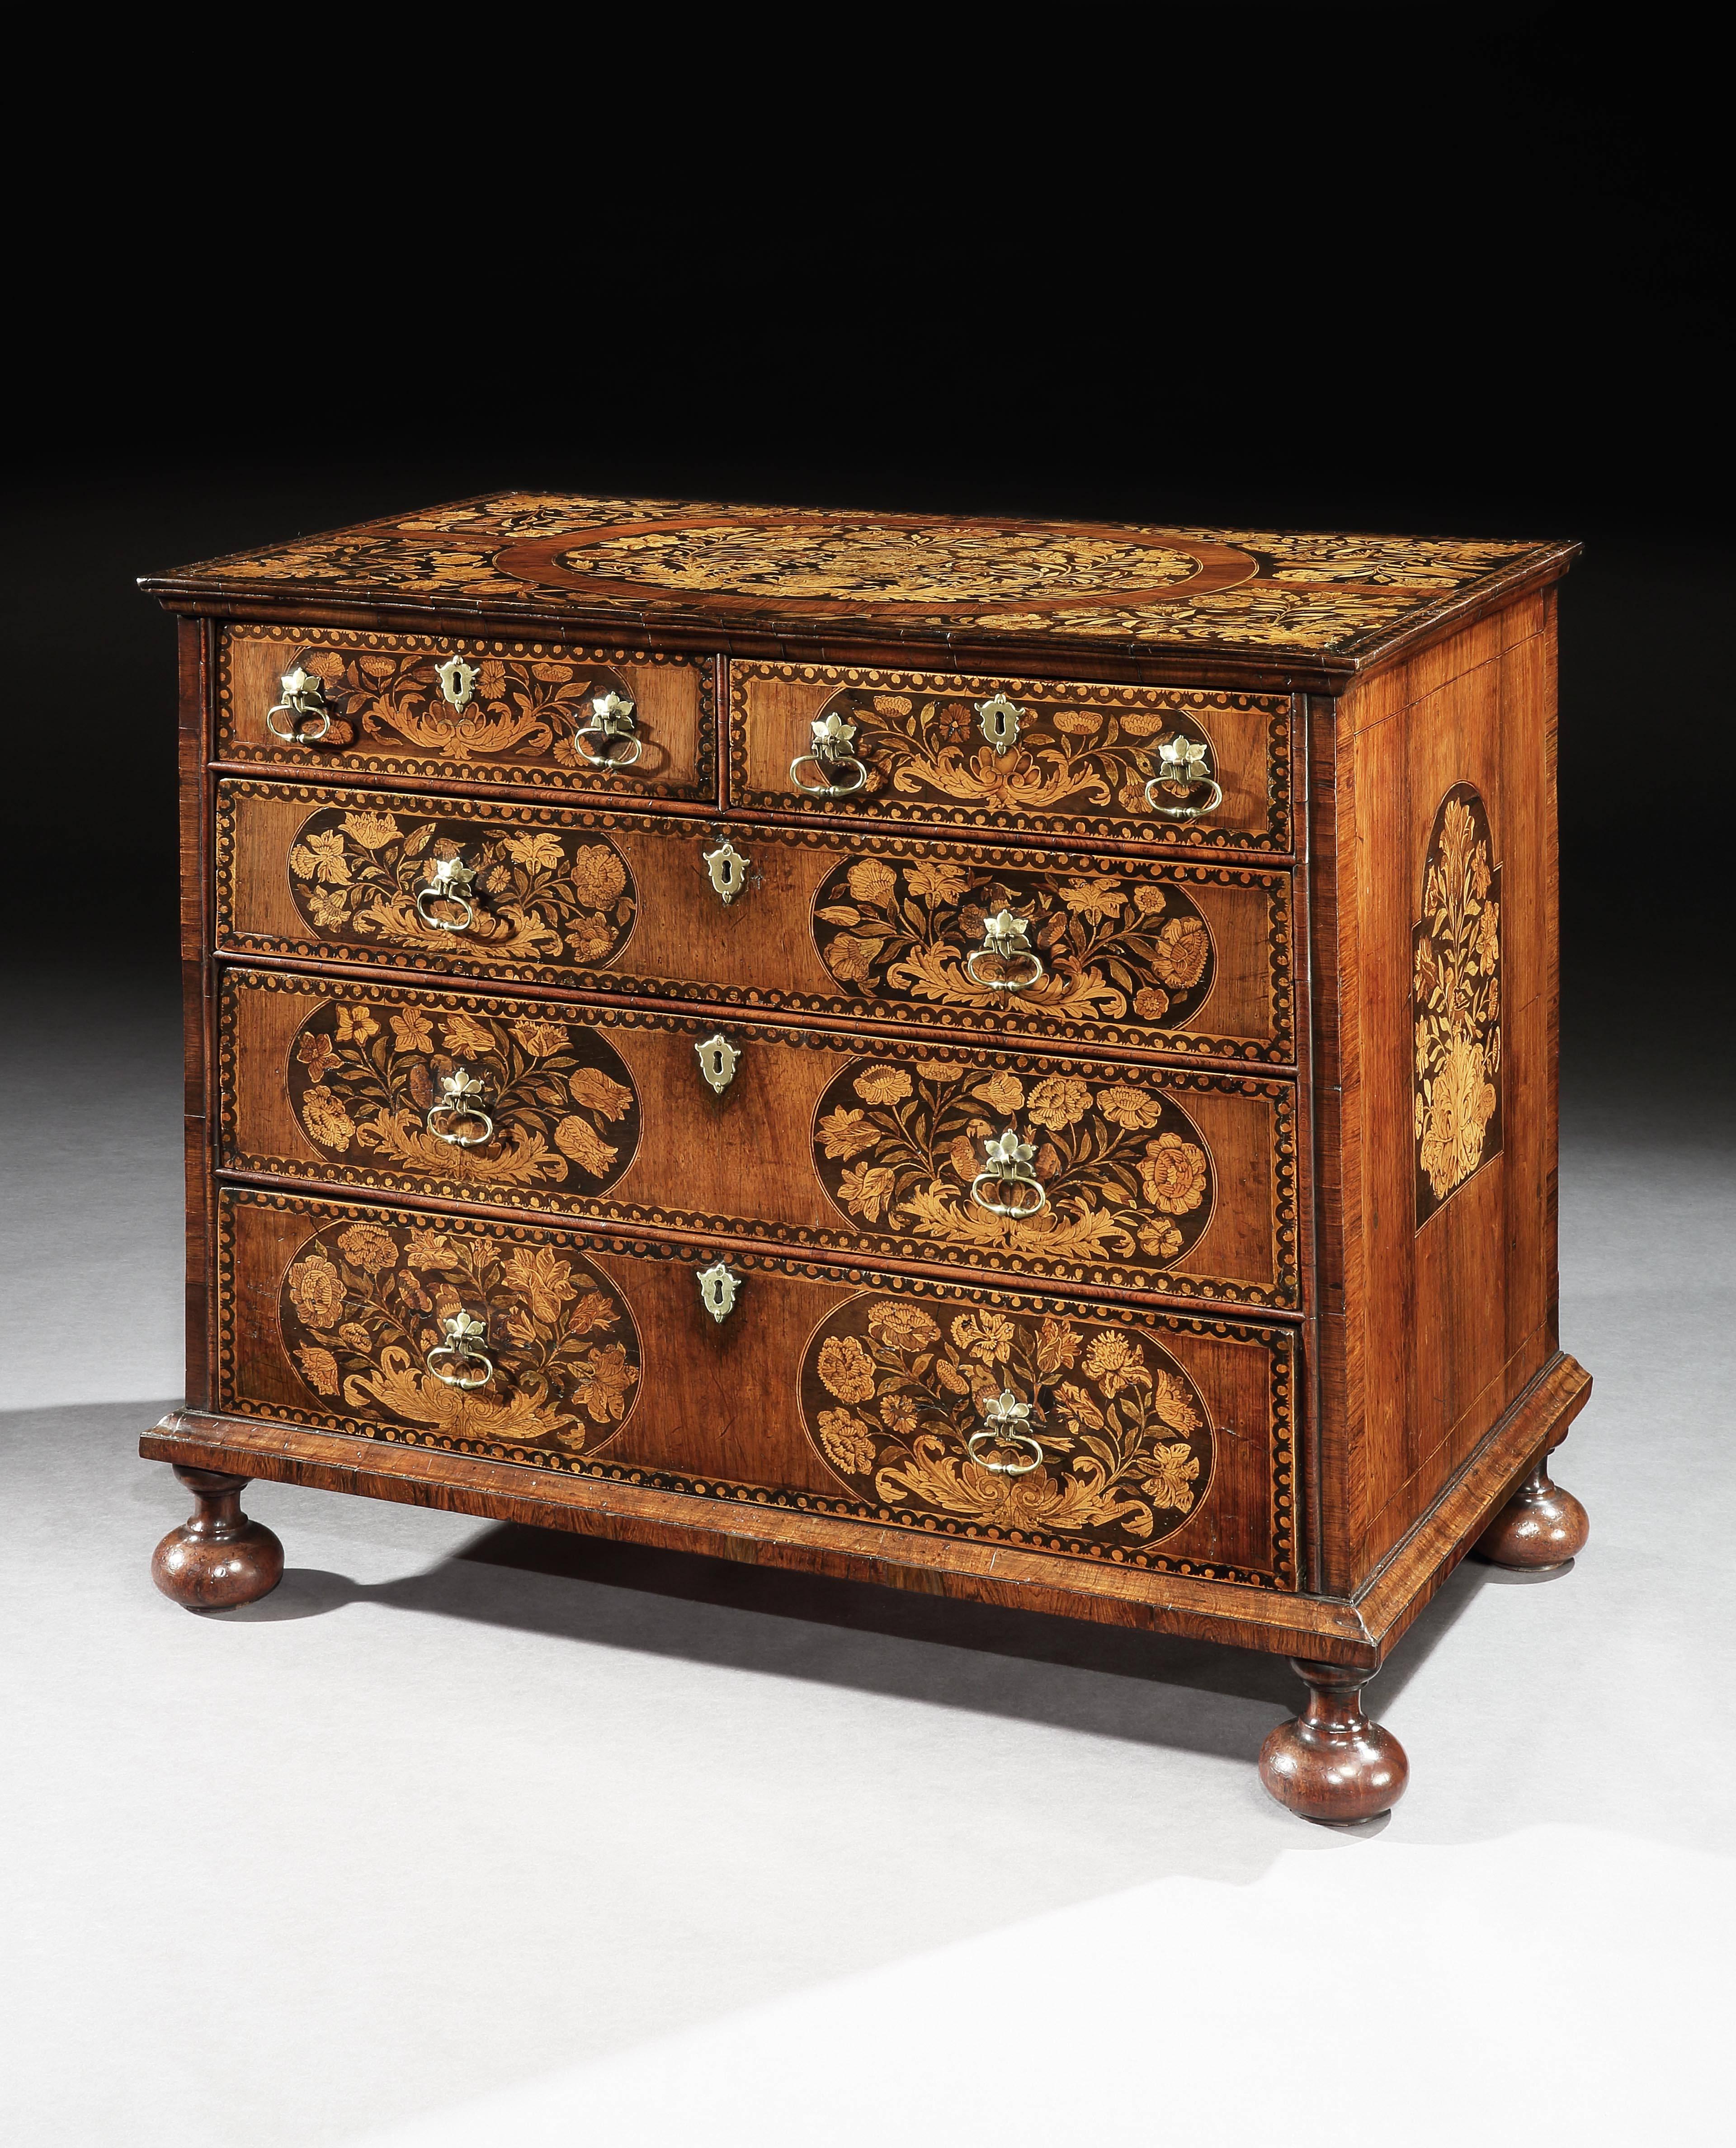 17th Century William and Mary Marquetry Chest of Drawers with Floral Marquetry